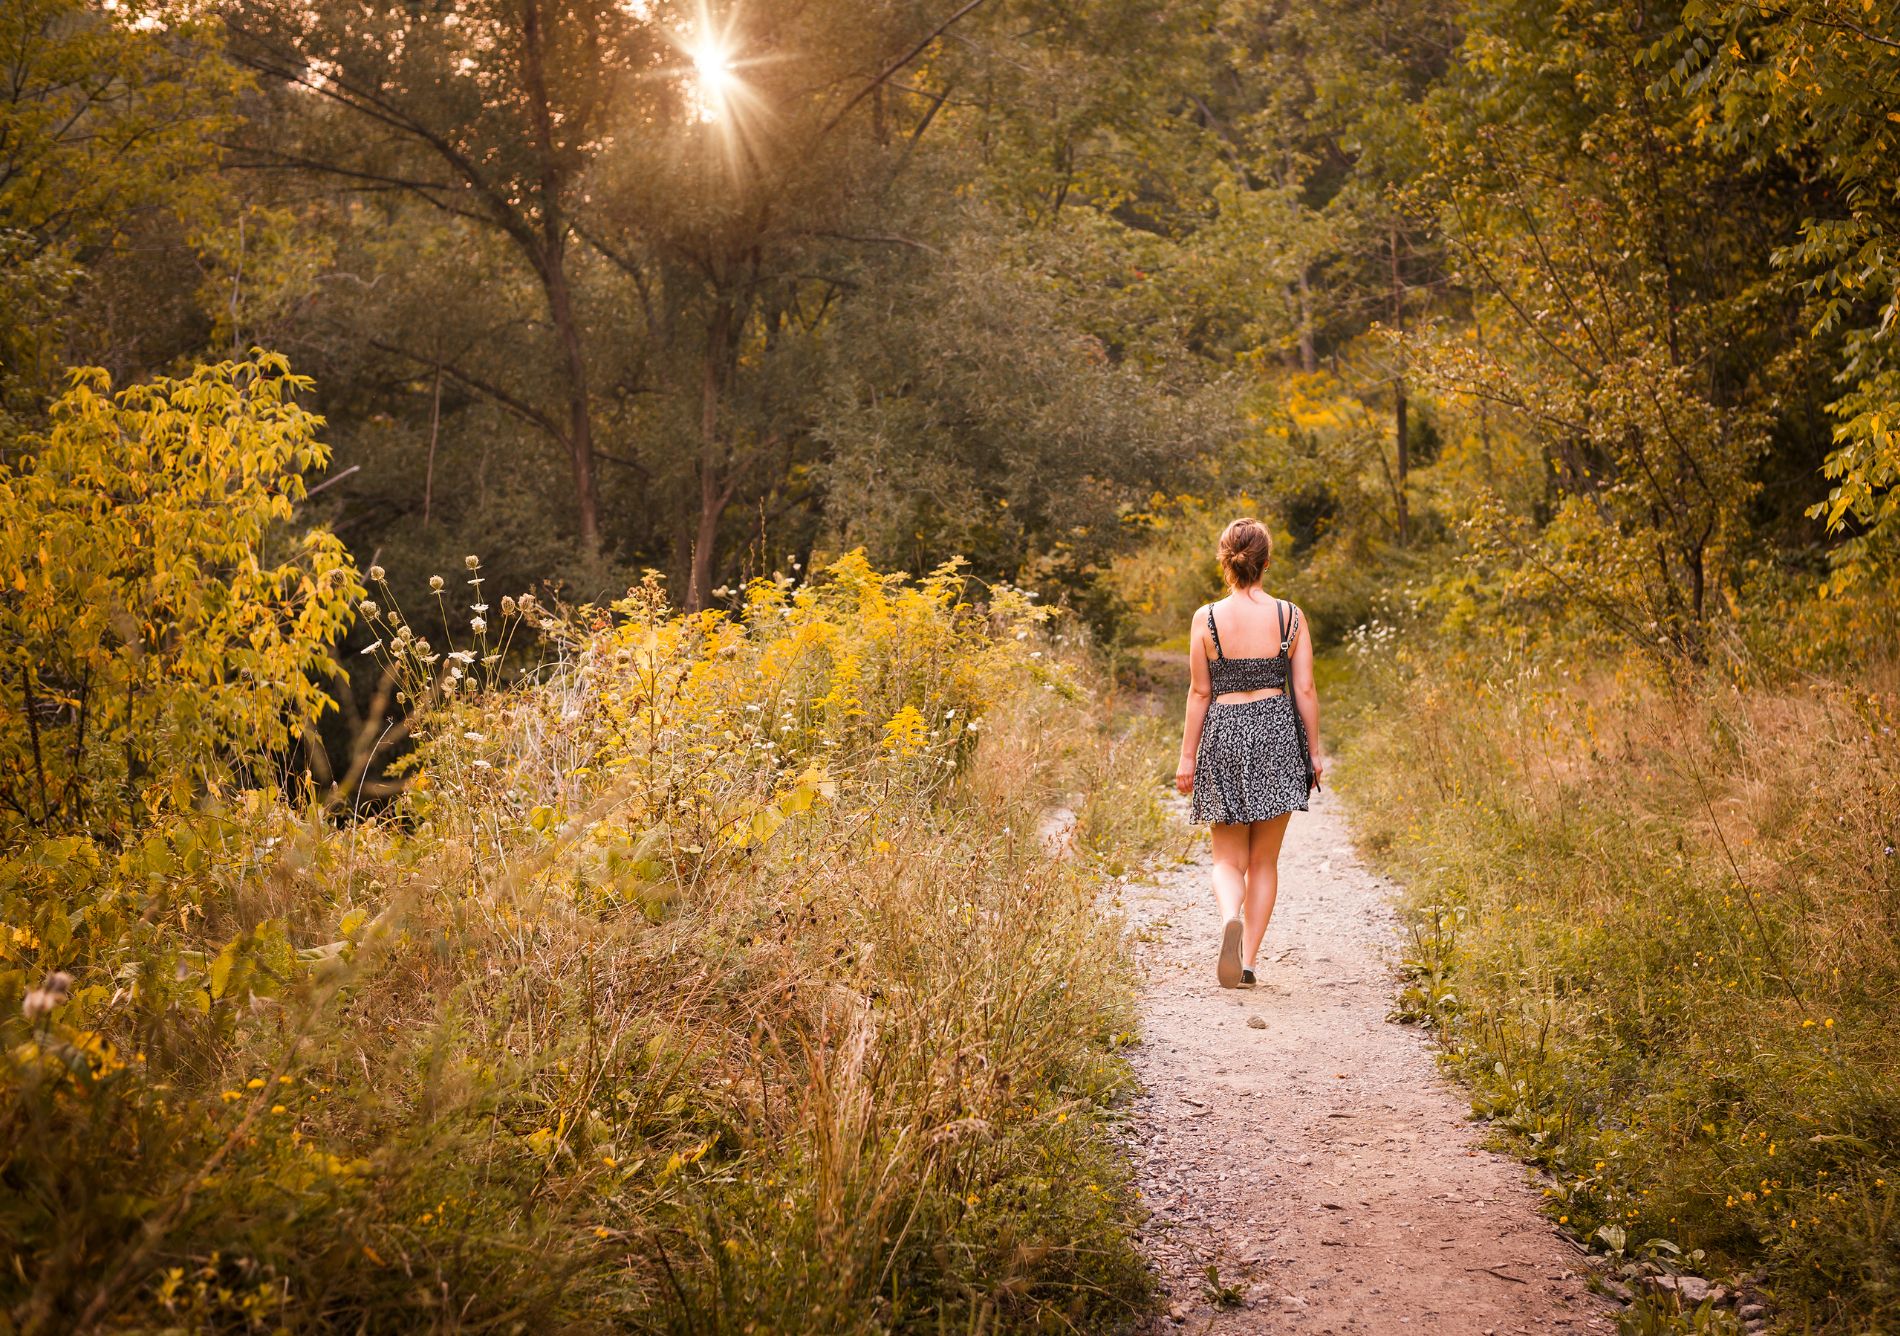 A woman in a dress is walking on a narrow path through the woods